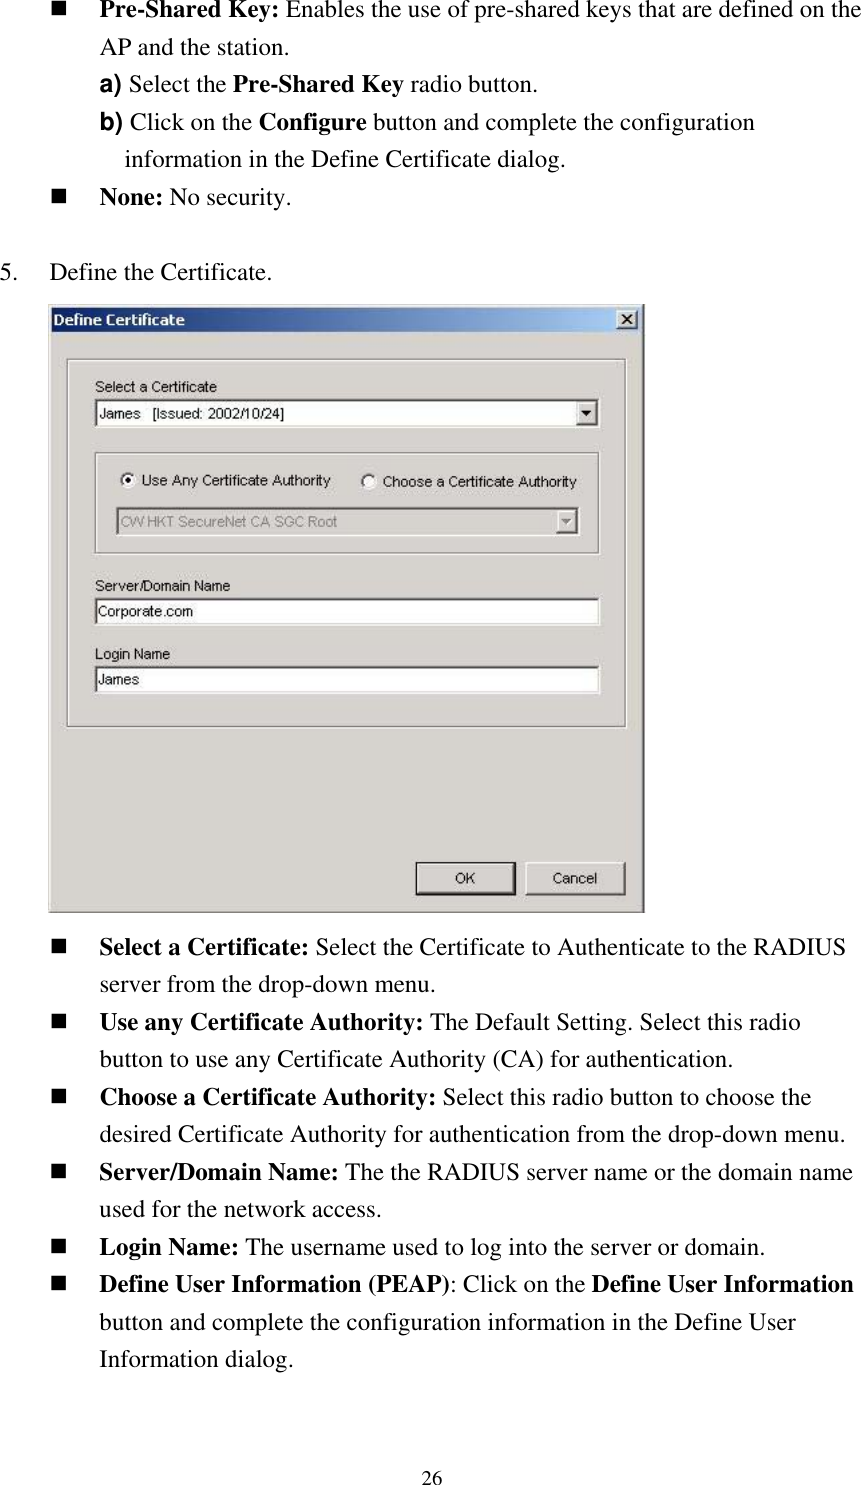  26 Pre-Shared Key: Enables the use of pre-shared keys that are defined on the AP and the station. a) Select the Pre-Shared Key radio button. b) Click on the Configure button and complete the configuration information in the Define Certificate dialog.  None: No security.  5.    Define the Certificate.        Select a Certificate: Select the Certificate to Authenticate to the RADIUS server from the drop-down menu.  Use any Certificate Authority: The Default Setting. Select this radio button to use any Certificate Authority (CA) for authentication.  Choose a Certificate Authority: Select this radio button to choose the desired Certificate Authority for authentication from the drop-down menu.  Server/Domain Name: The the RADIUS server name or the domain name used for the network access.  Login Name: The username used to log into the server or domain.  Define User Information (PEAP): Click on the Define User Information button and complete the configuration information in the Define User Information dialog.  